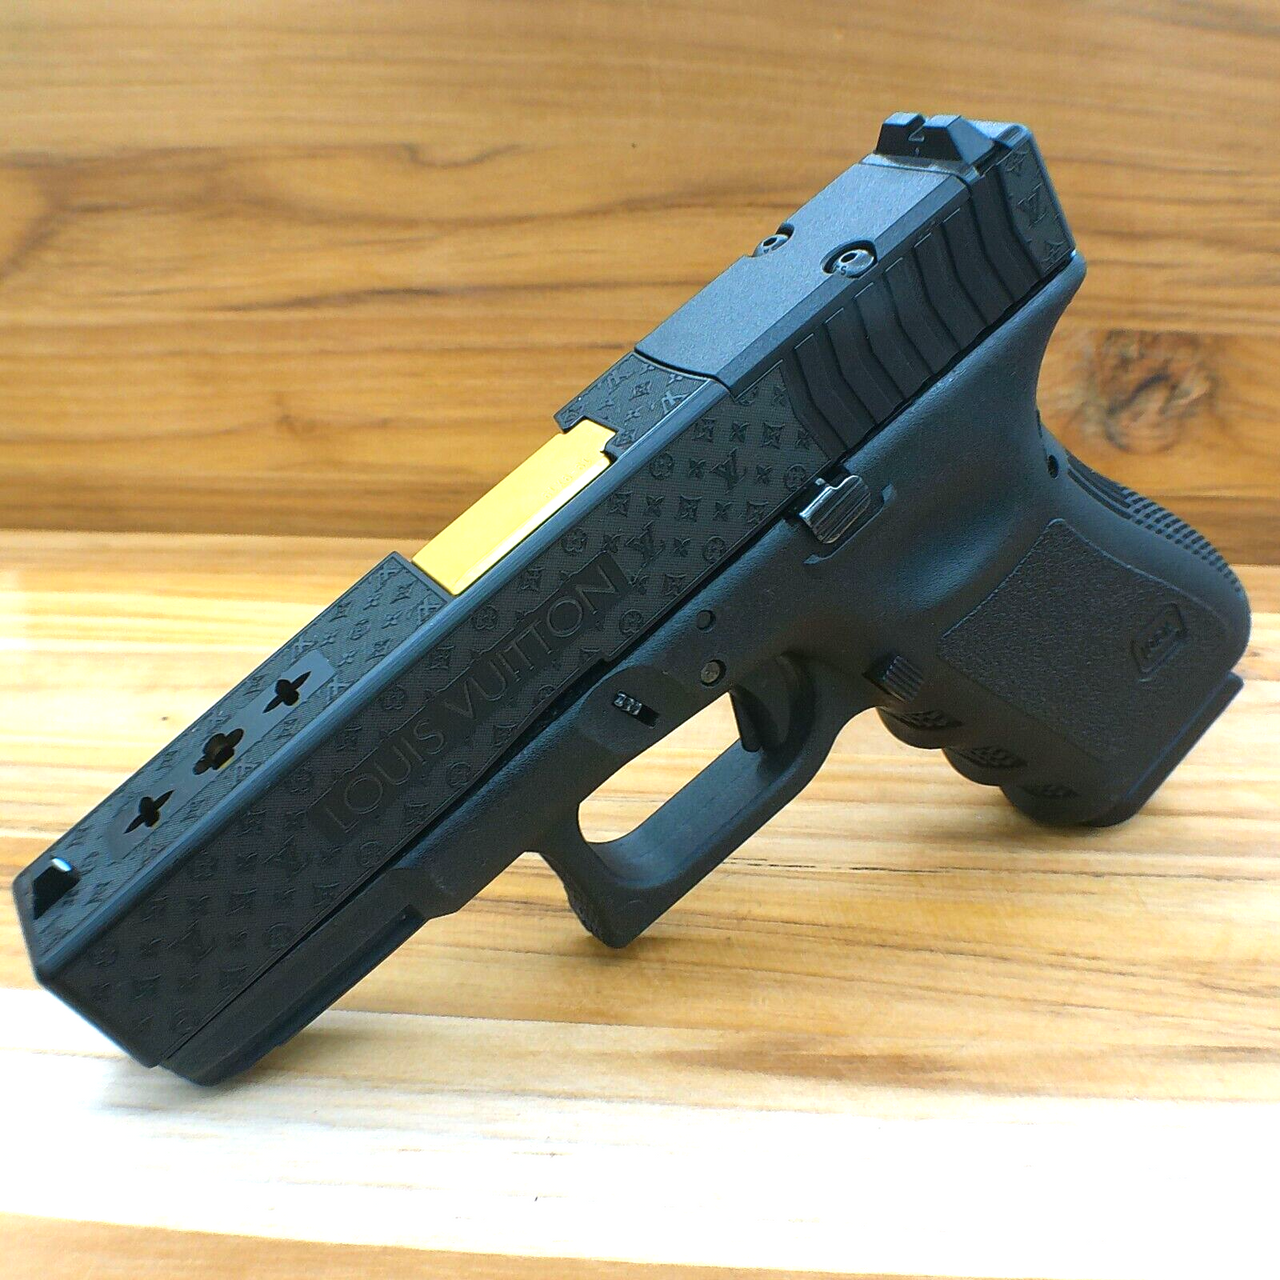 HERITAGE COLLECTABLES: Louis Vuitton Glock C19 9MM